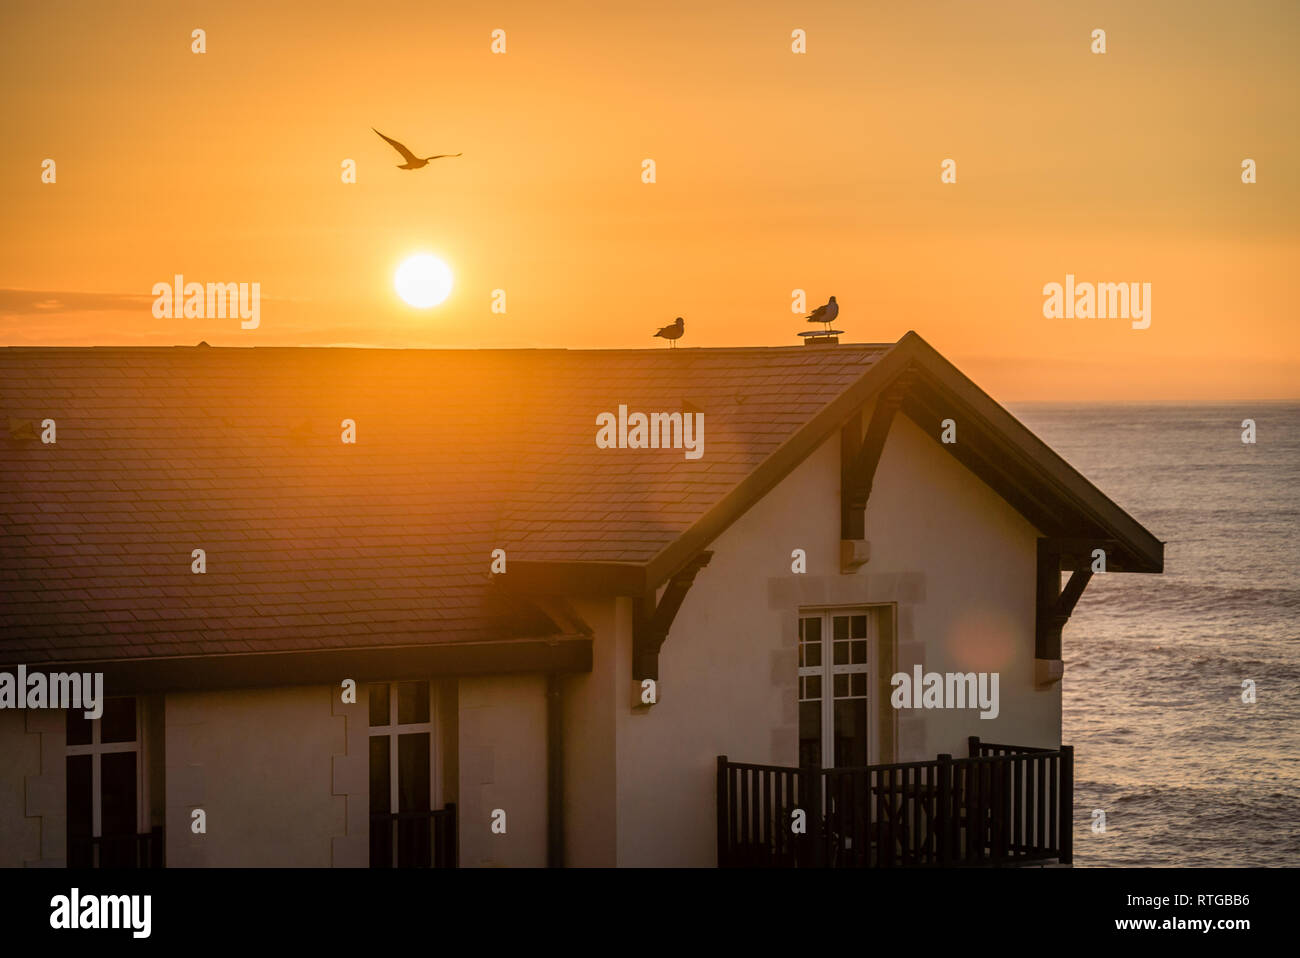 Birds on a roof in the sunset with ocean in the background Stock Photo